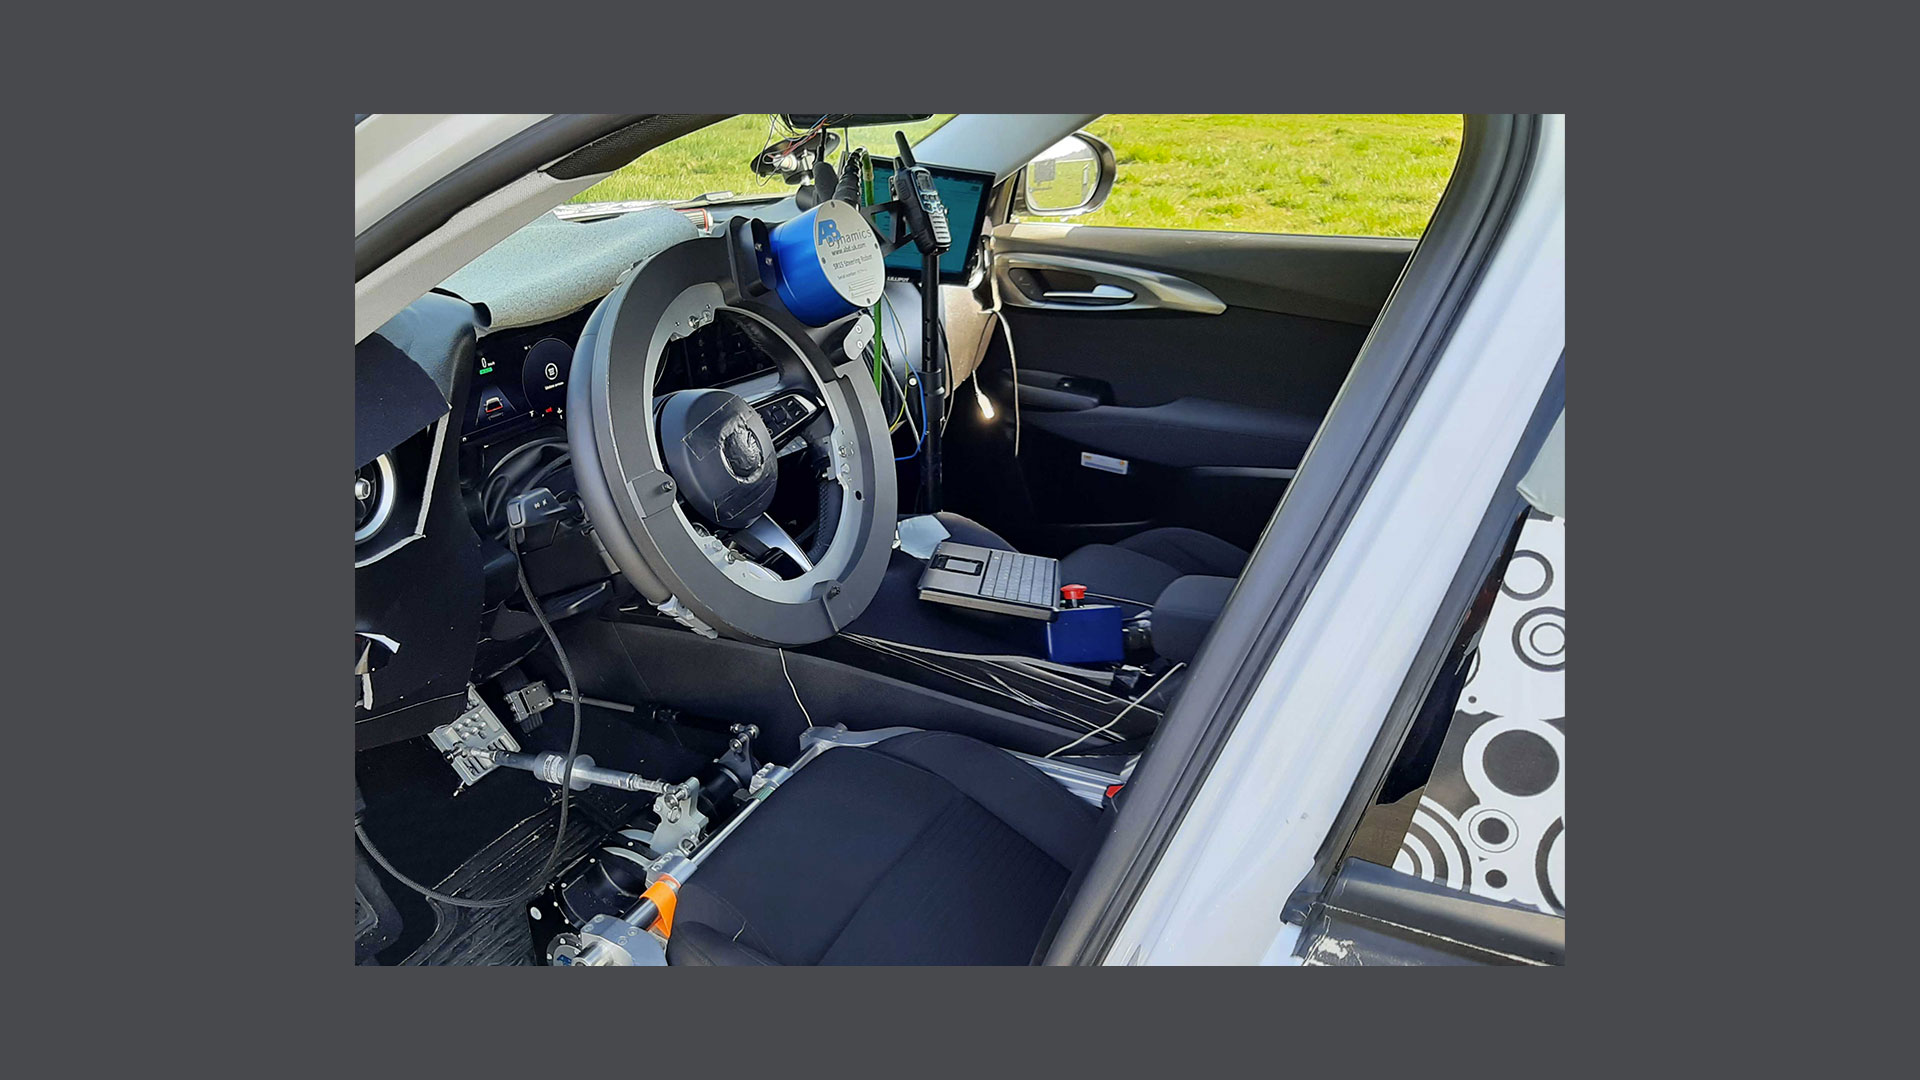 Photo of the interior of a car